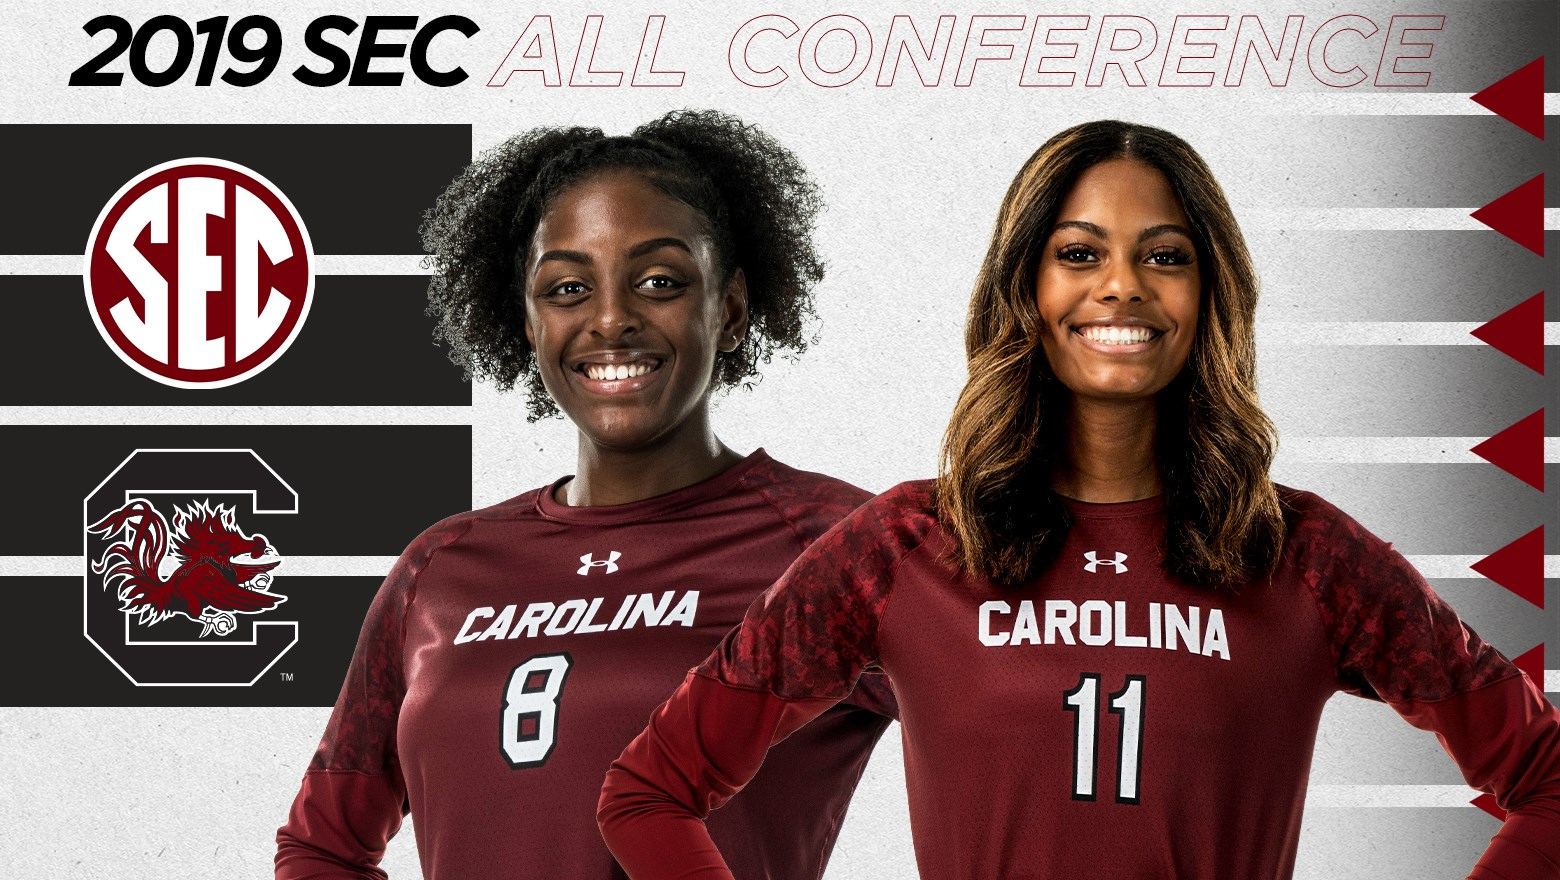 Shields and Robinson Earn All-SEC Honors